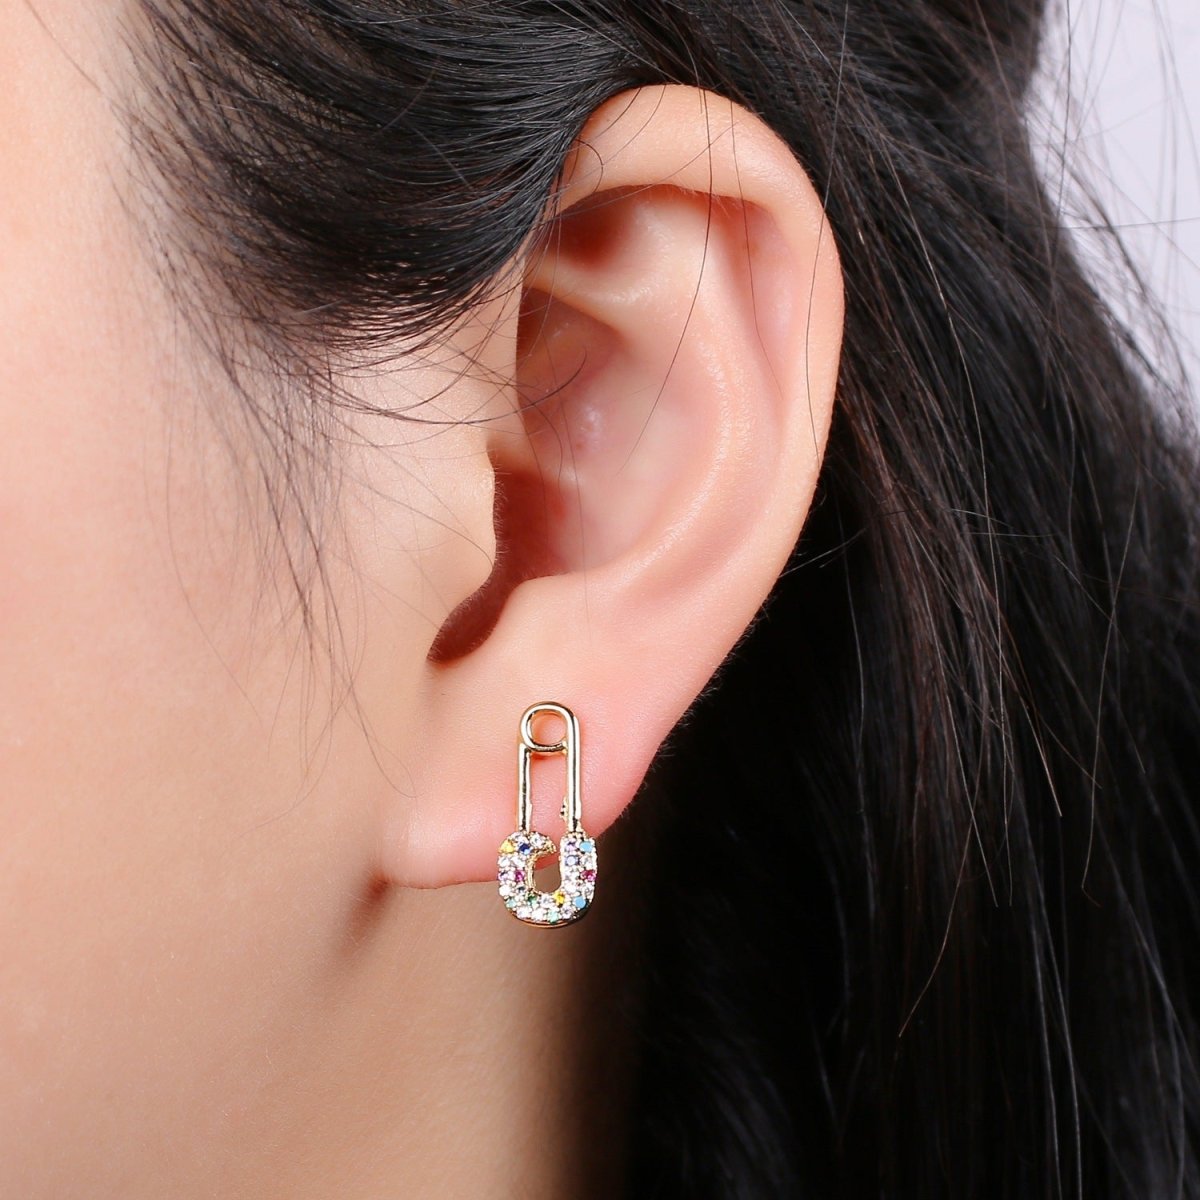 Safety Pin Earring 24K Gold Multi Color Pave Cz Stud Earring, Chunky Stud Design Earring, Q-512 - DLUXCA